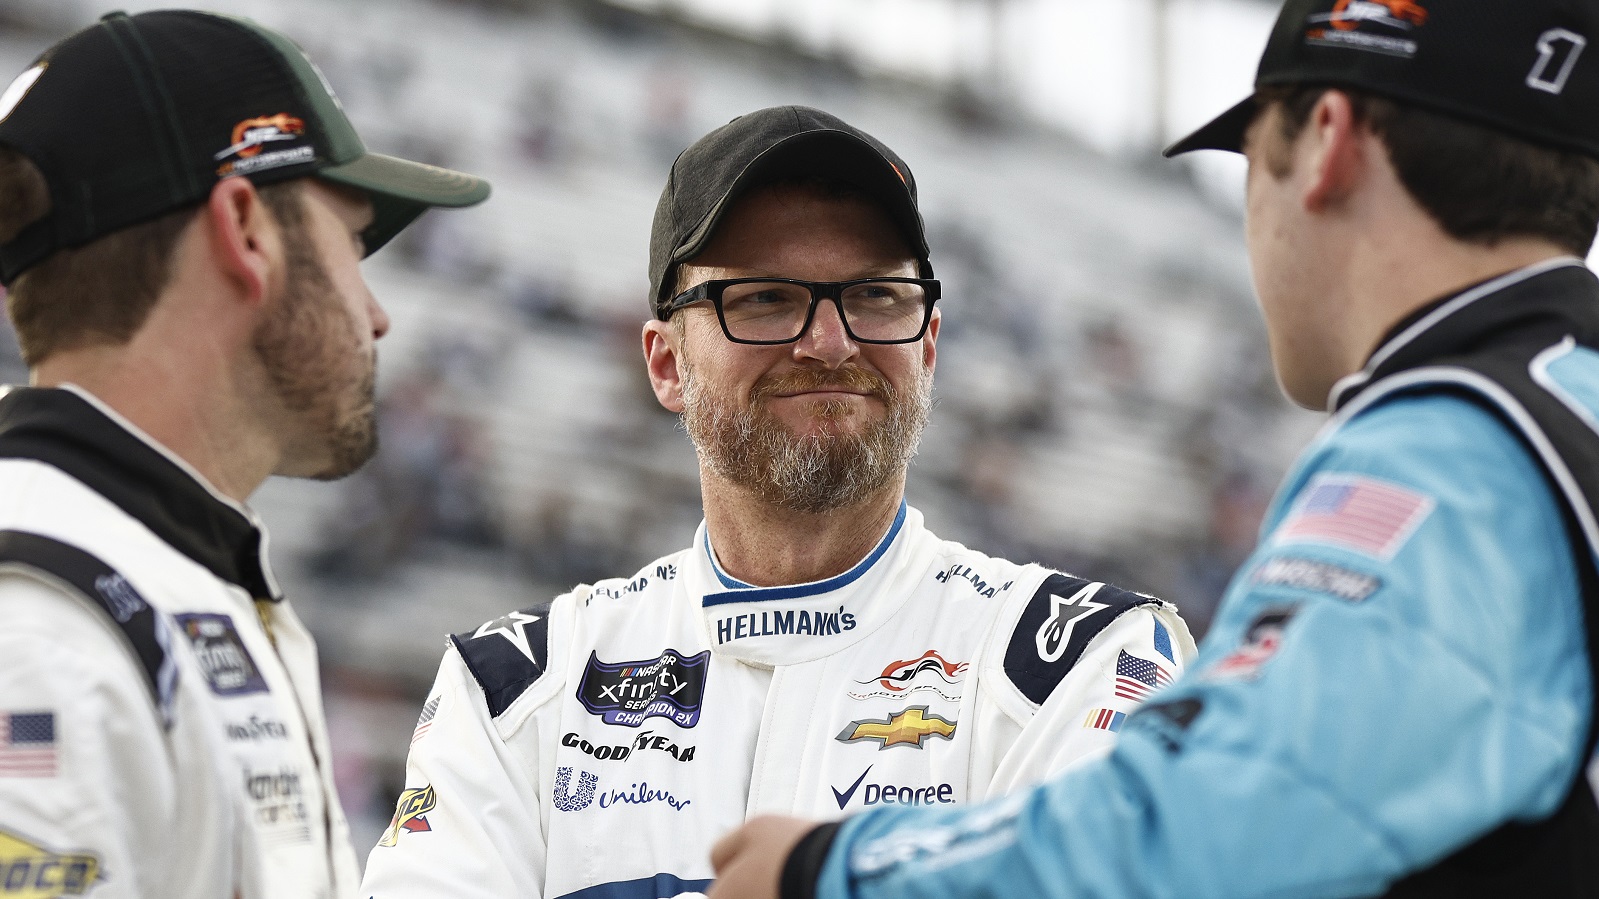 Dale Earnhardt Jr., center, speaks with Josh Berry and Sam Mayer on the grid during qualifying for the NASCAR Xfinity Series Call 811 Before You Dig 250 at Martinsville Speedway on April 7, 2022.